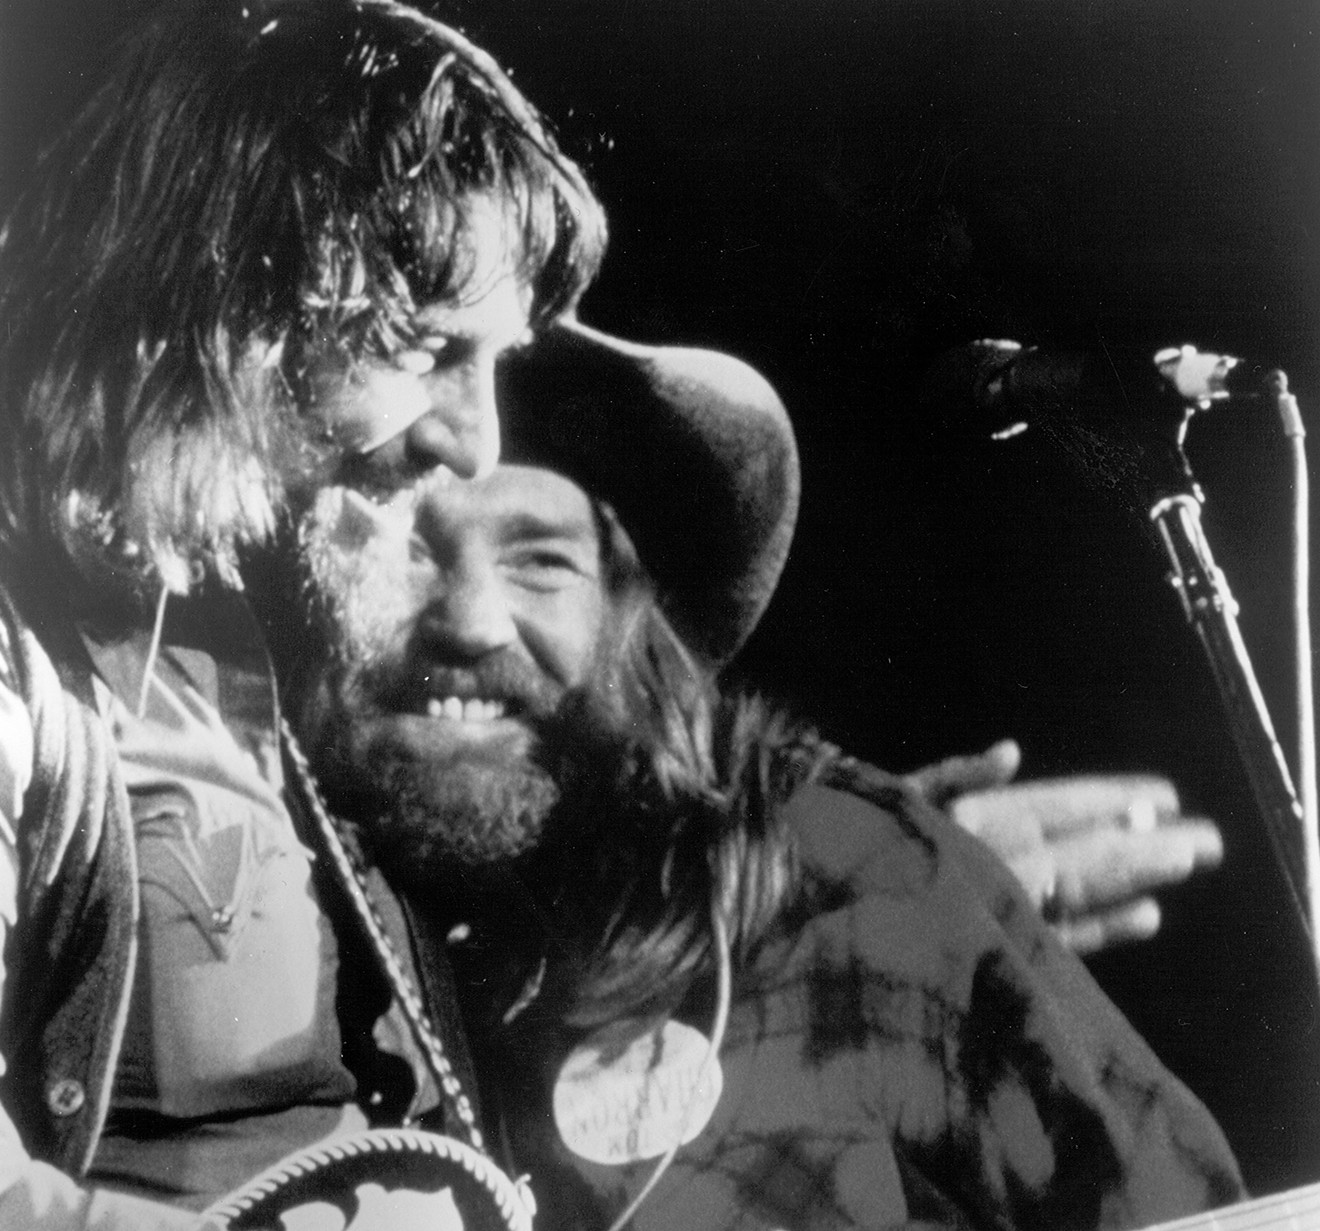 Waylon and Willie are both subjects of the 16-hour series Country Music, which premiered at Southern Methodist University on Thursday.